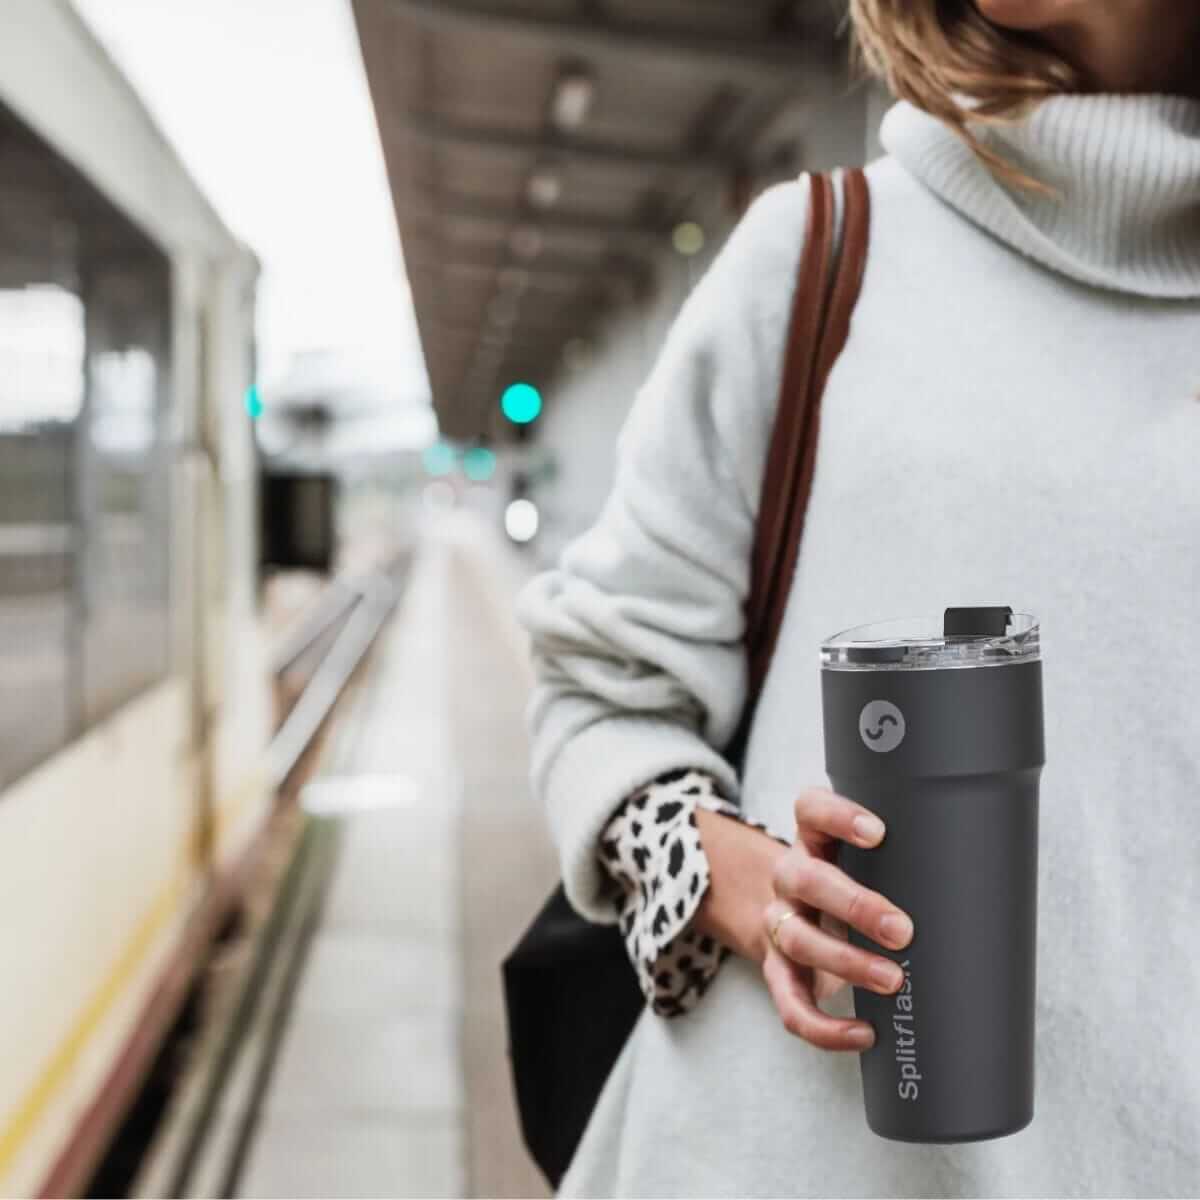 Woman at a train station holding a Splitflask tumbler on her way to work